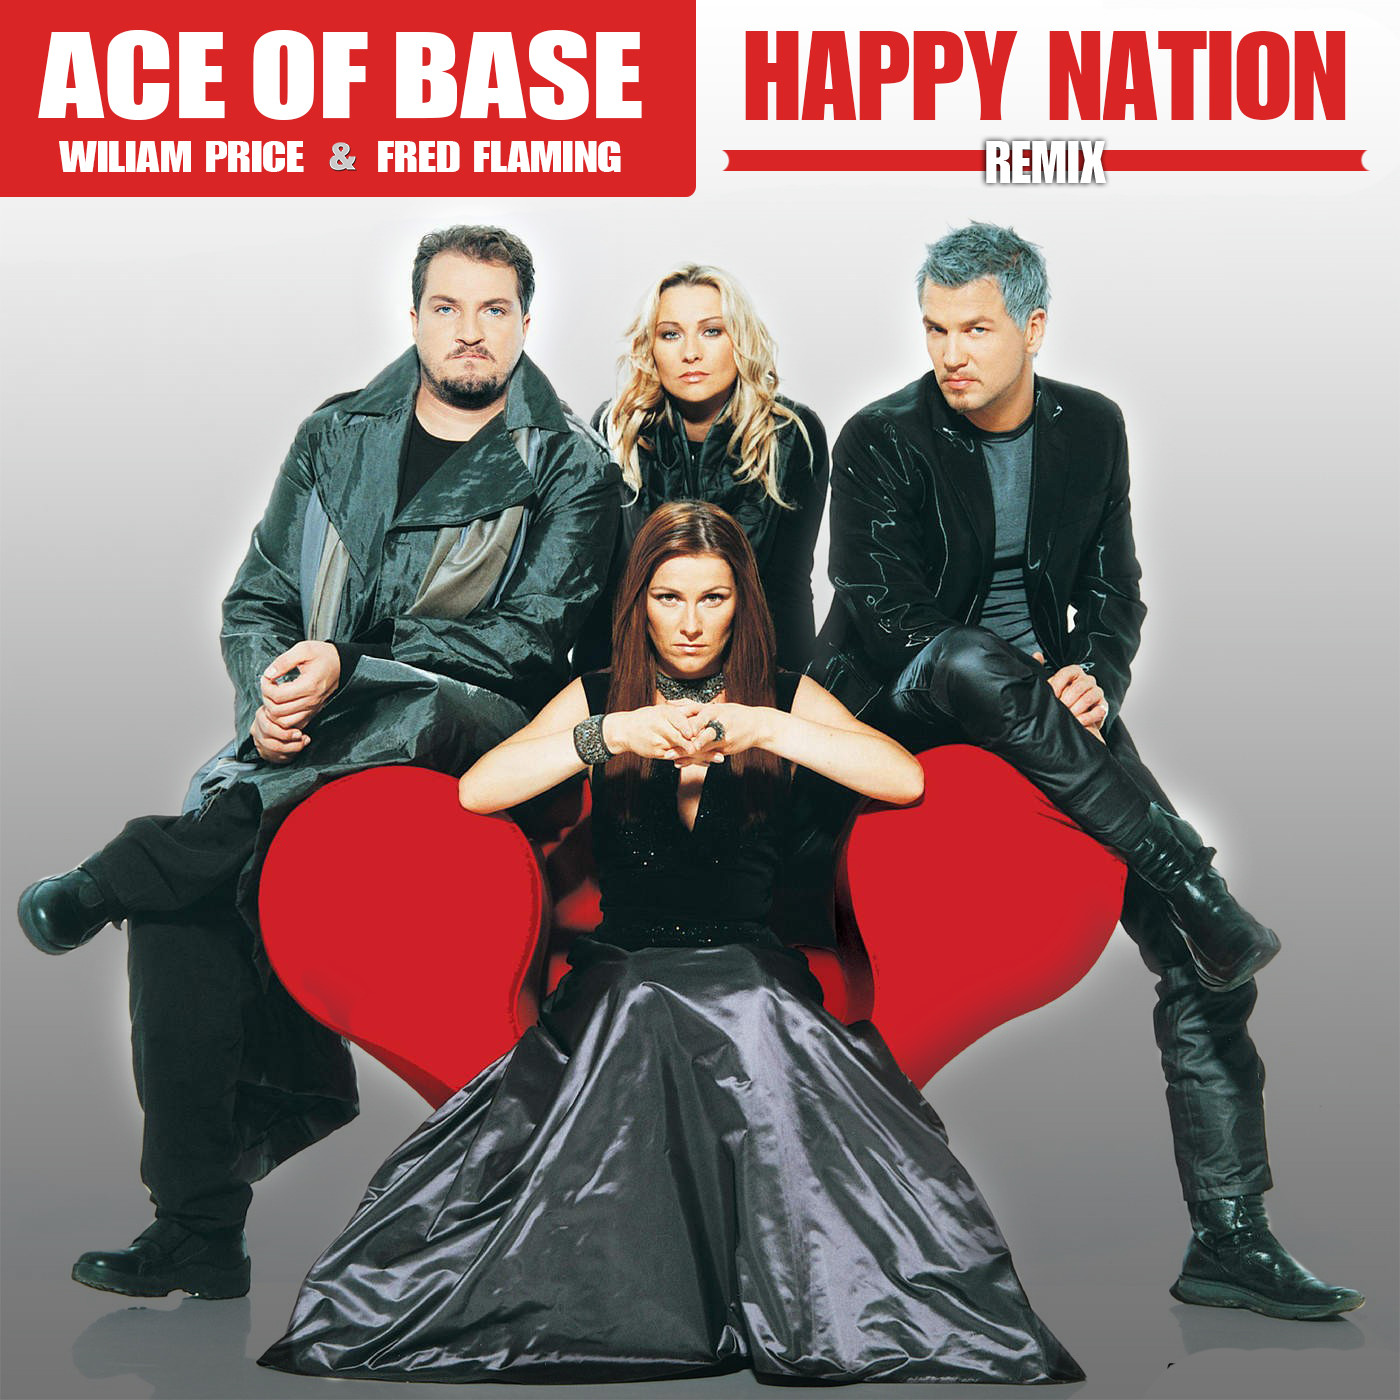 Fred mykos happy nation. Ace of Base 1992. Ace of Base 2022. Ace of Base Happy Nation. Ace of Base Happy Fred Mykos.